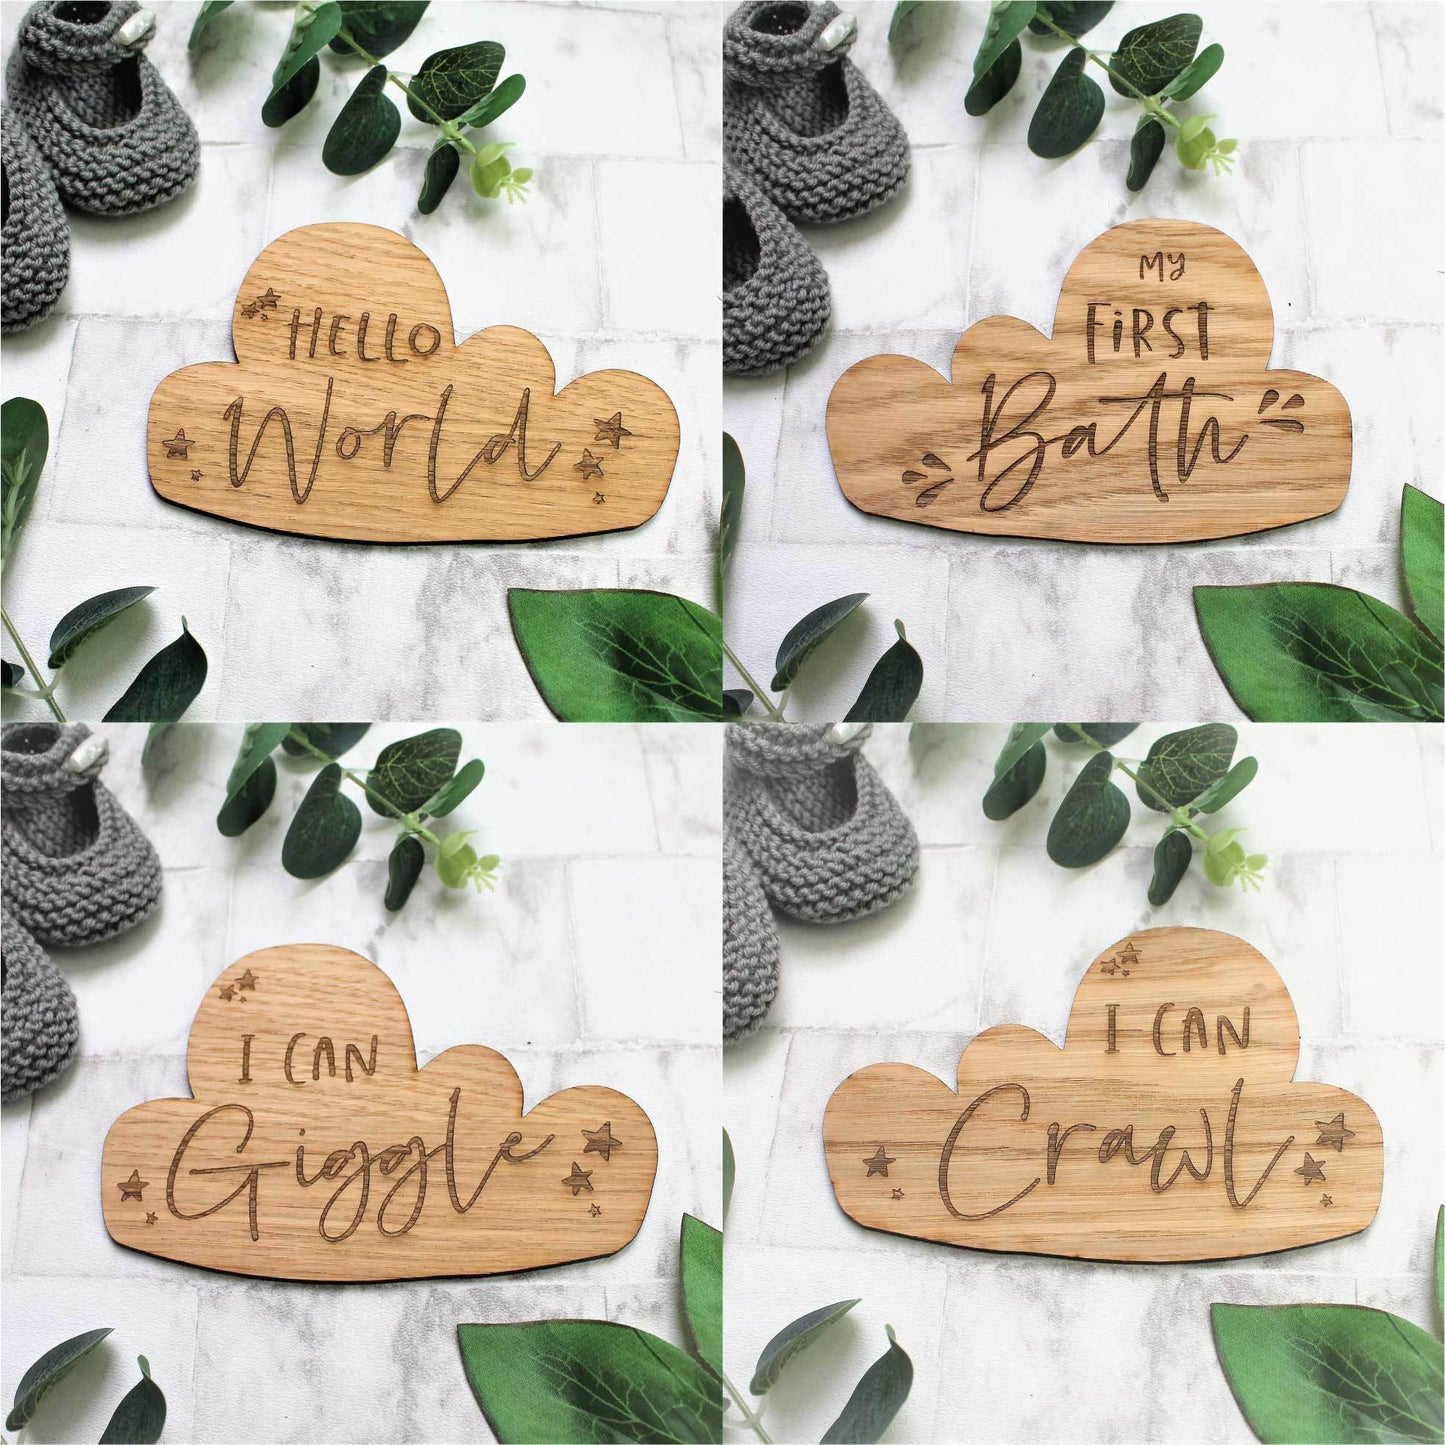 baby milestone / moments wooden engraved baby shower gifts, Hello world, my first bath